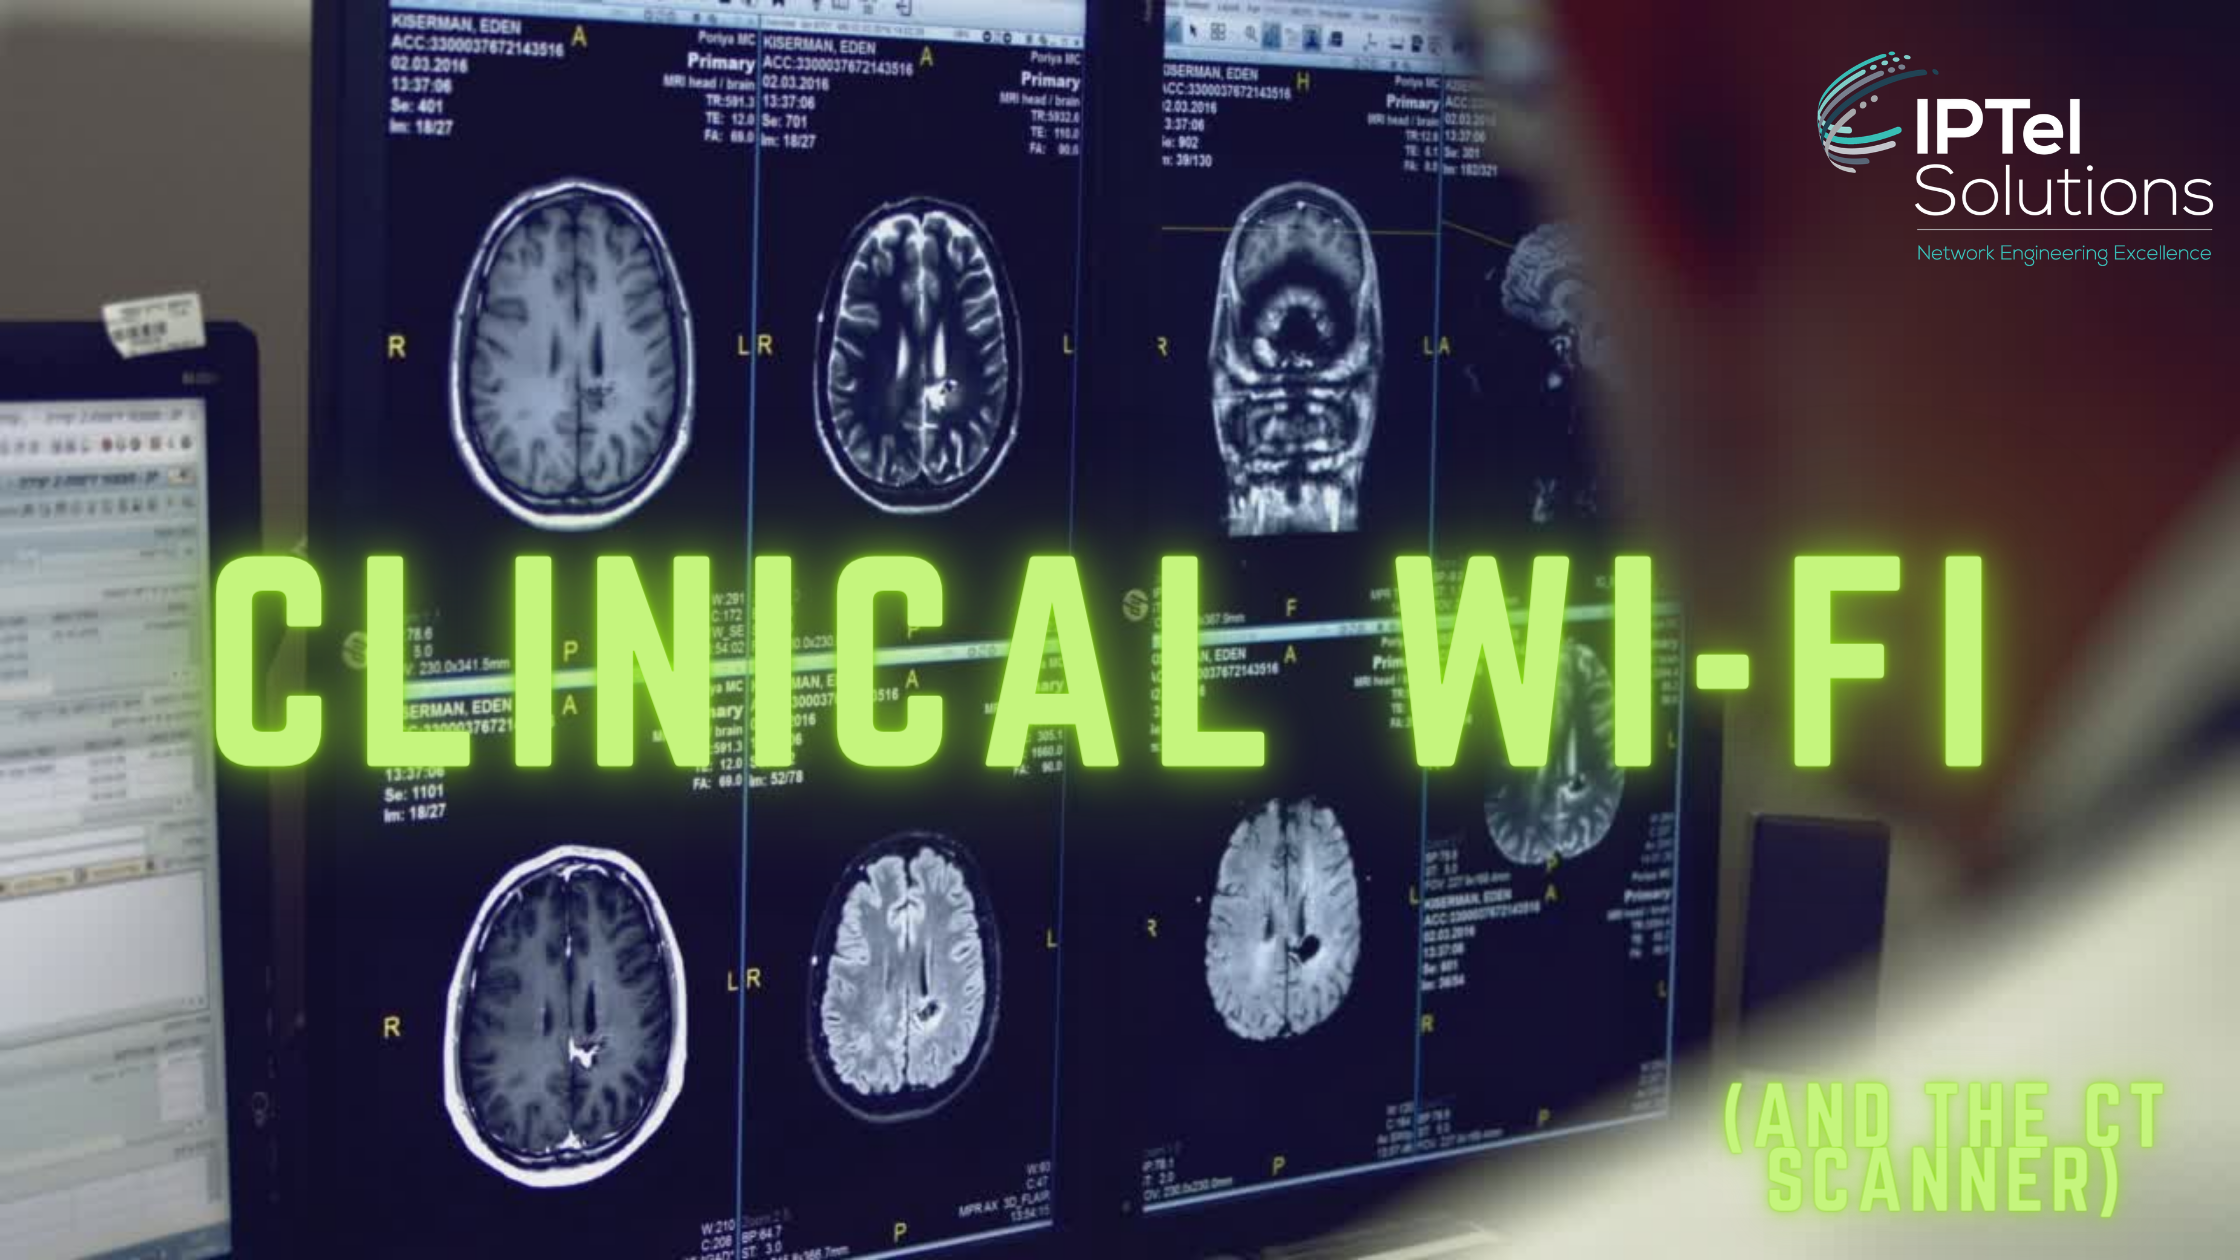 Clinical Wi-Fi and the CT Scanner